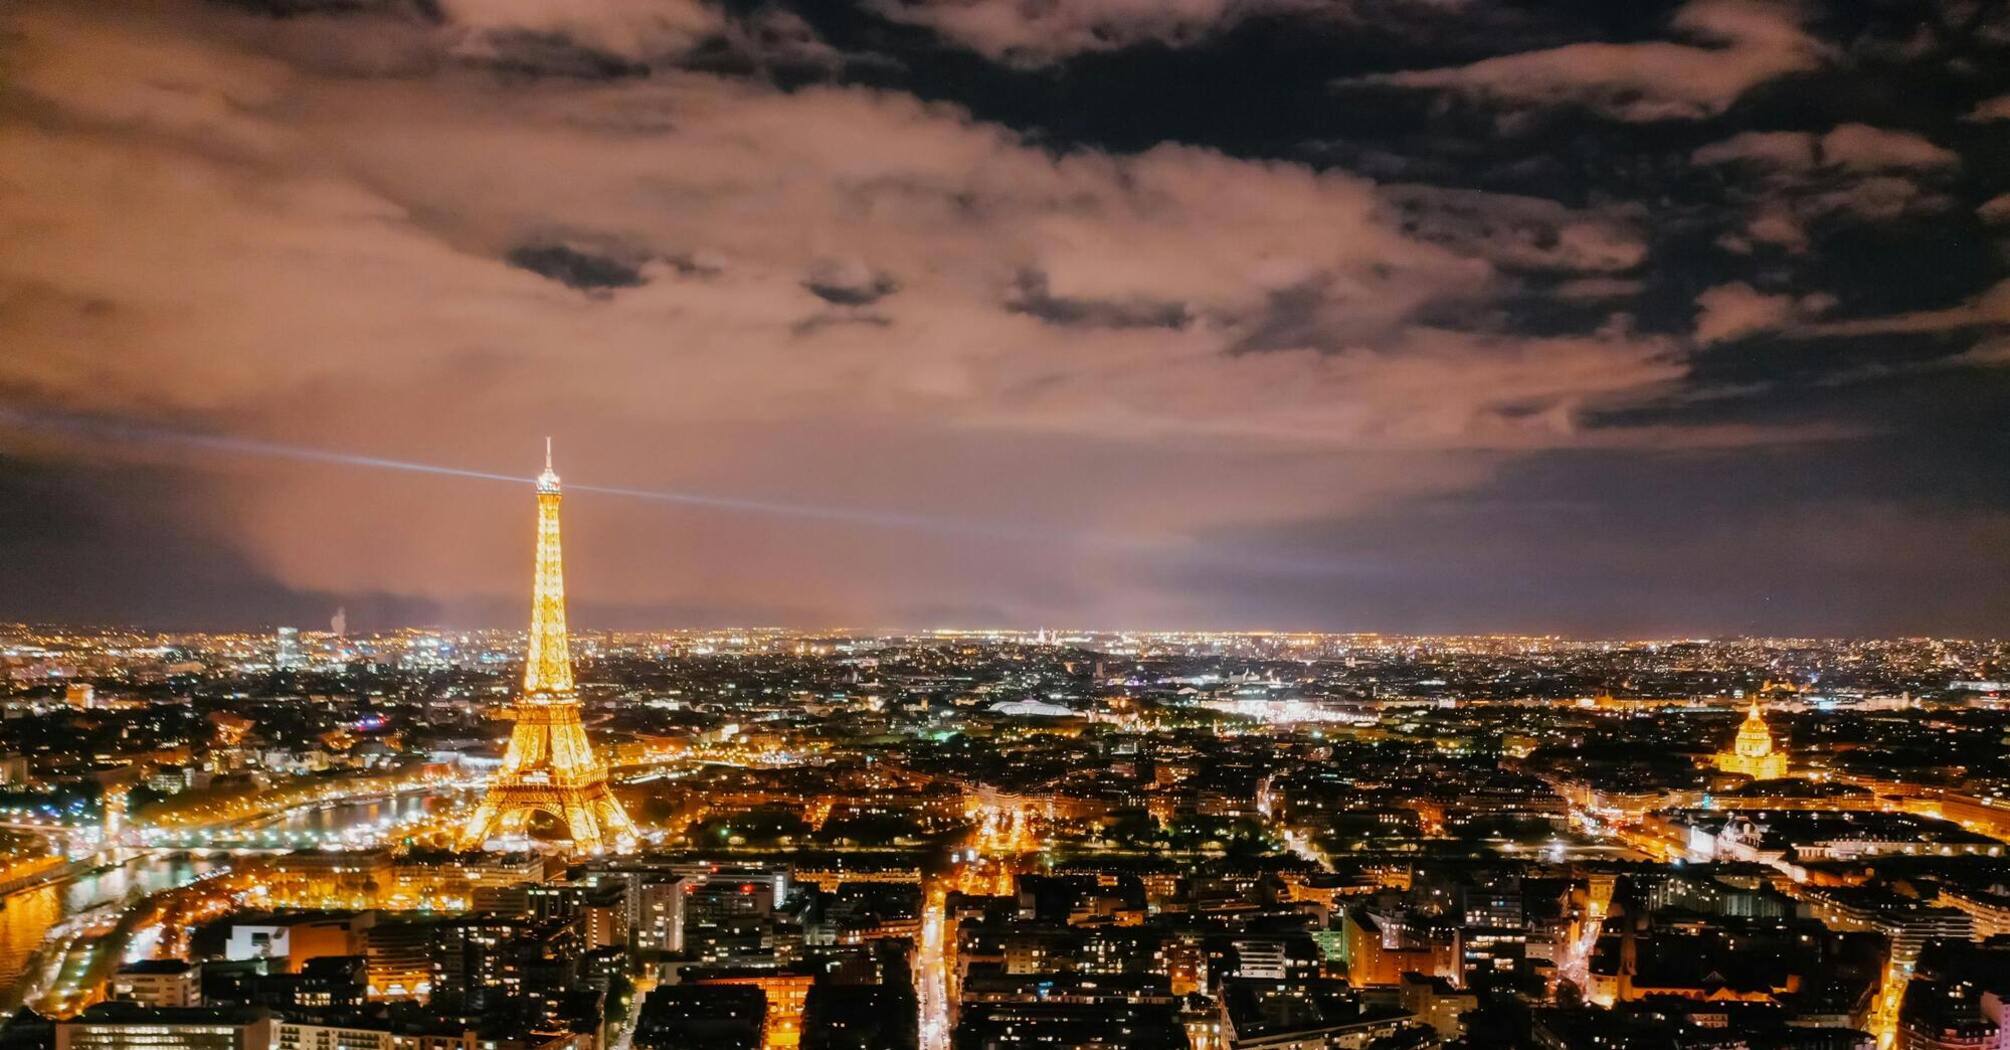 Top 10 inexpensive hotels in Paris to see the Eiffel Tower on a tight budget